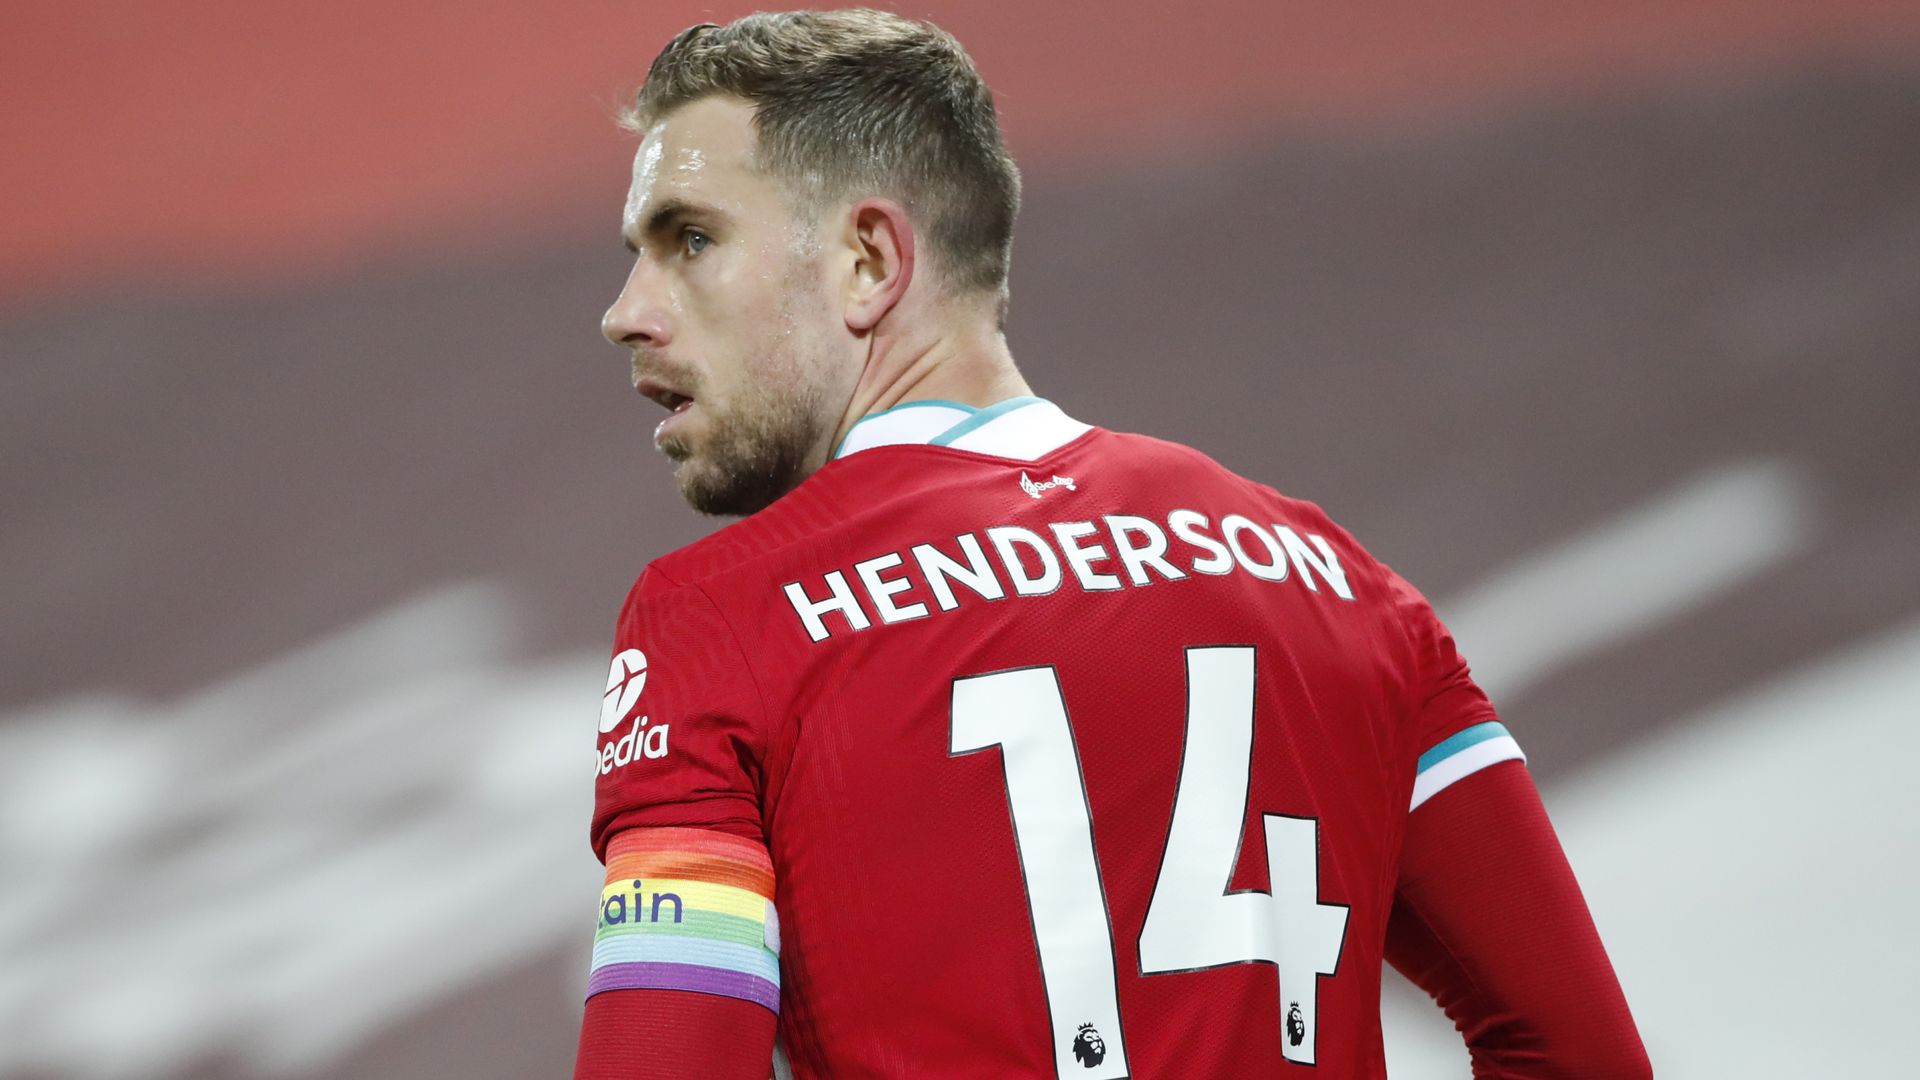 Henderson to Saudi: Why it matters